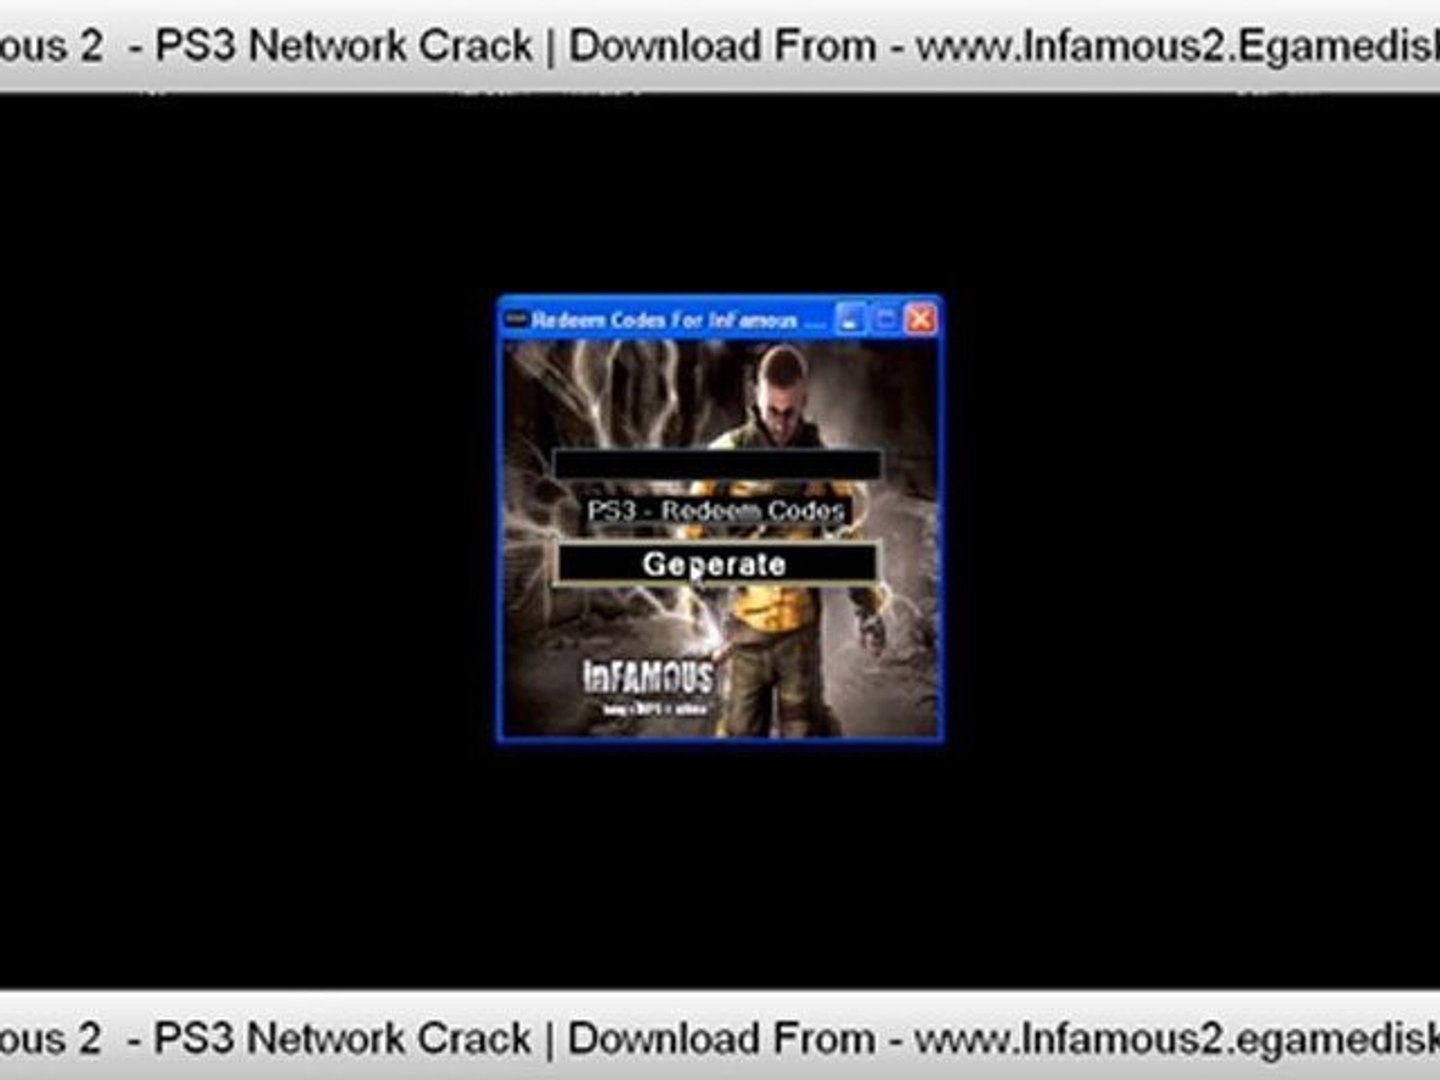 Infamous 2 DLC PS3 Redeem Codes. - video Dailymotion